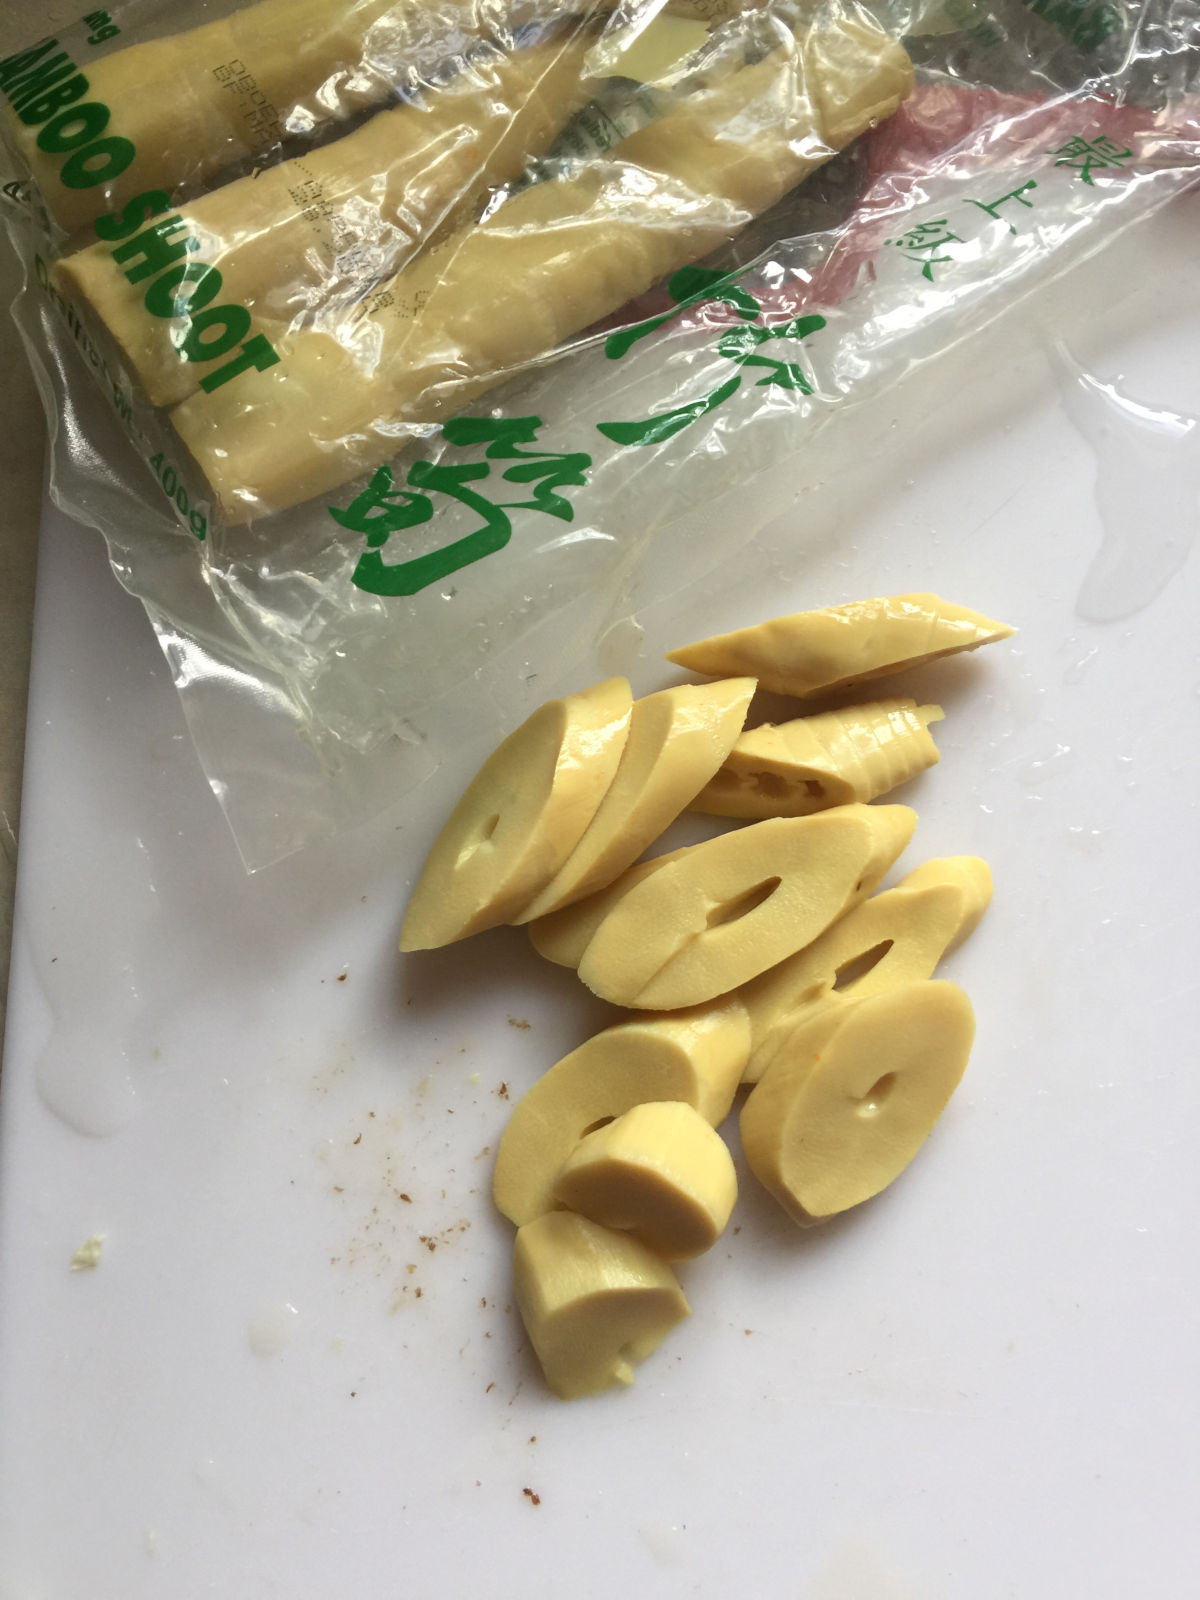 Small pieces of bamboo shoots on cutting board next to a package of bamboo shoot.